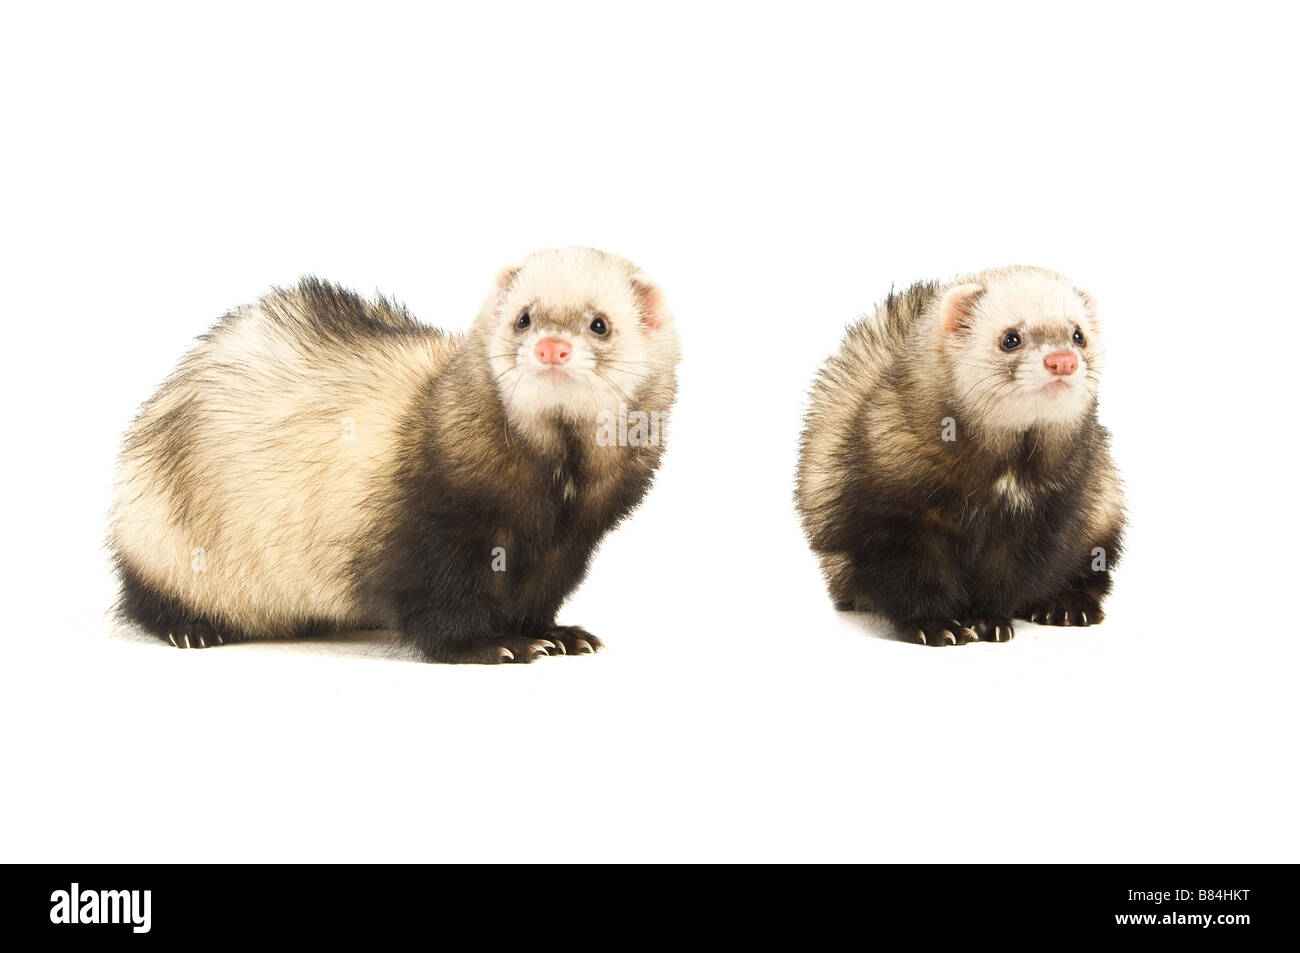 Ferrets isolated on a white background Stock Photo